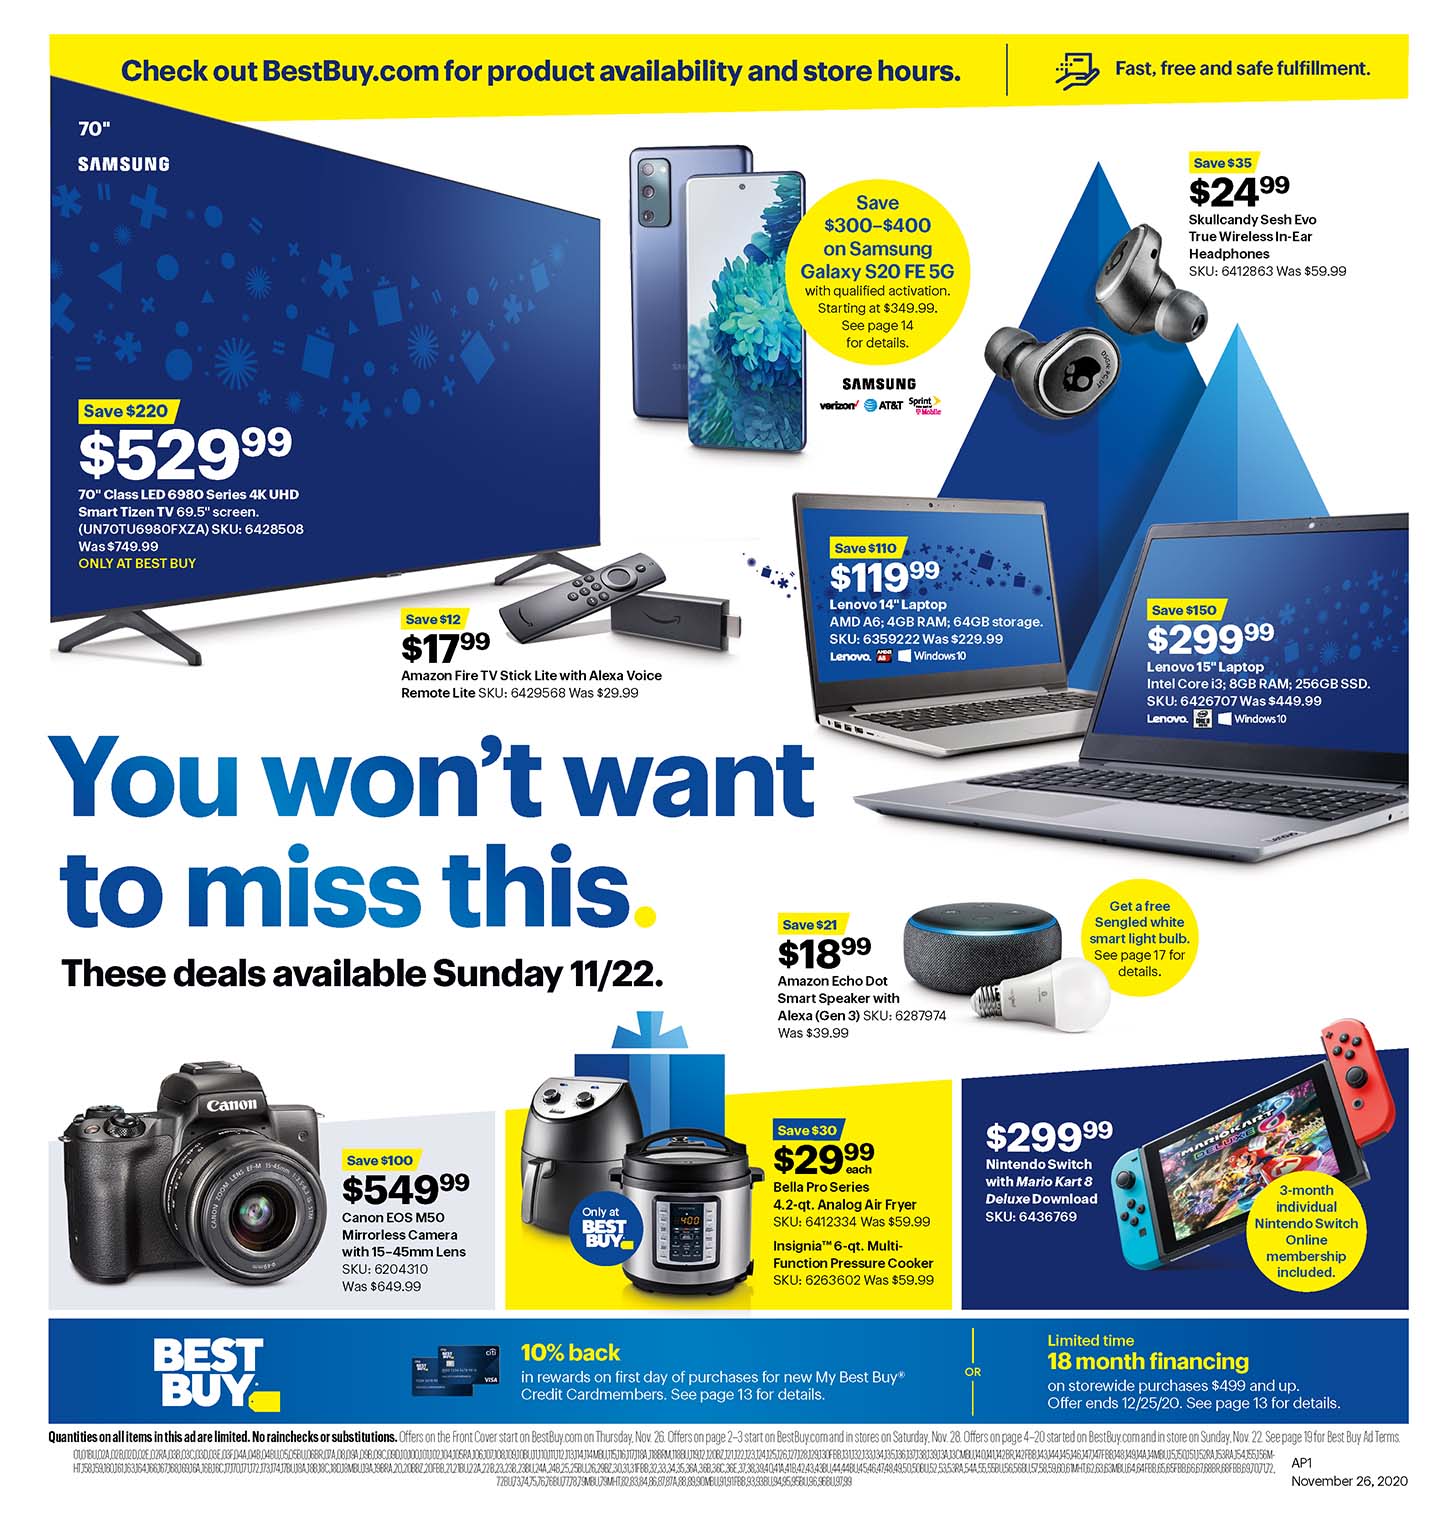 Best Buy Black Friday Ad 2020 - Must Have Deals For Black Friday